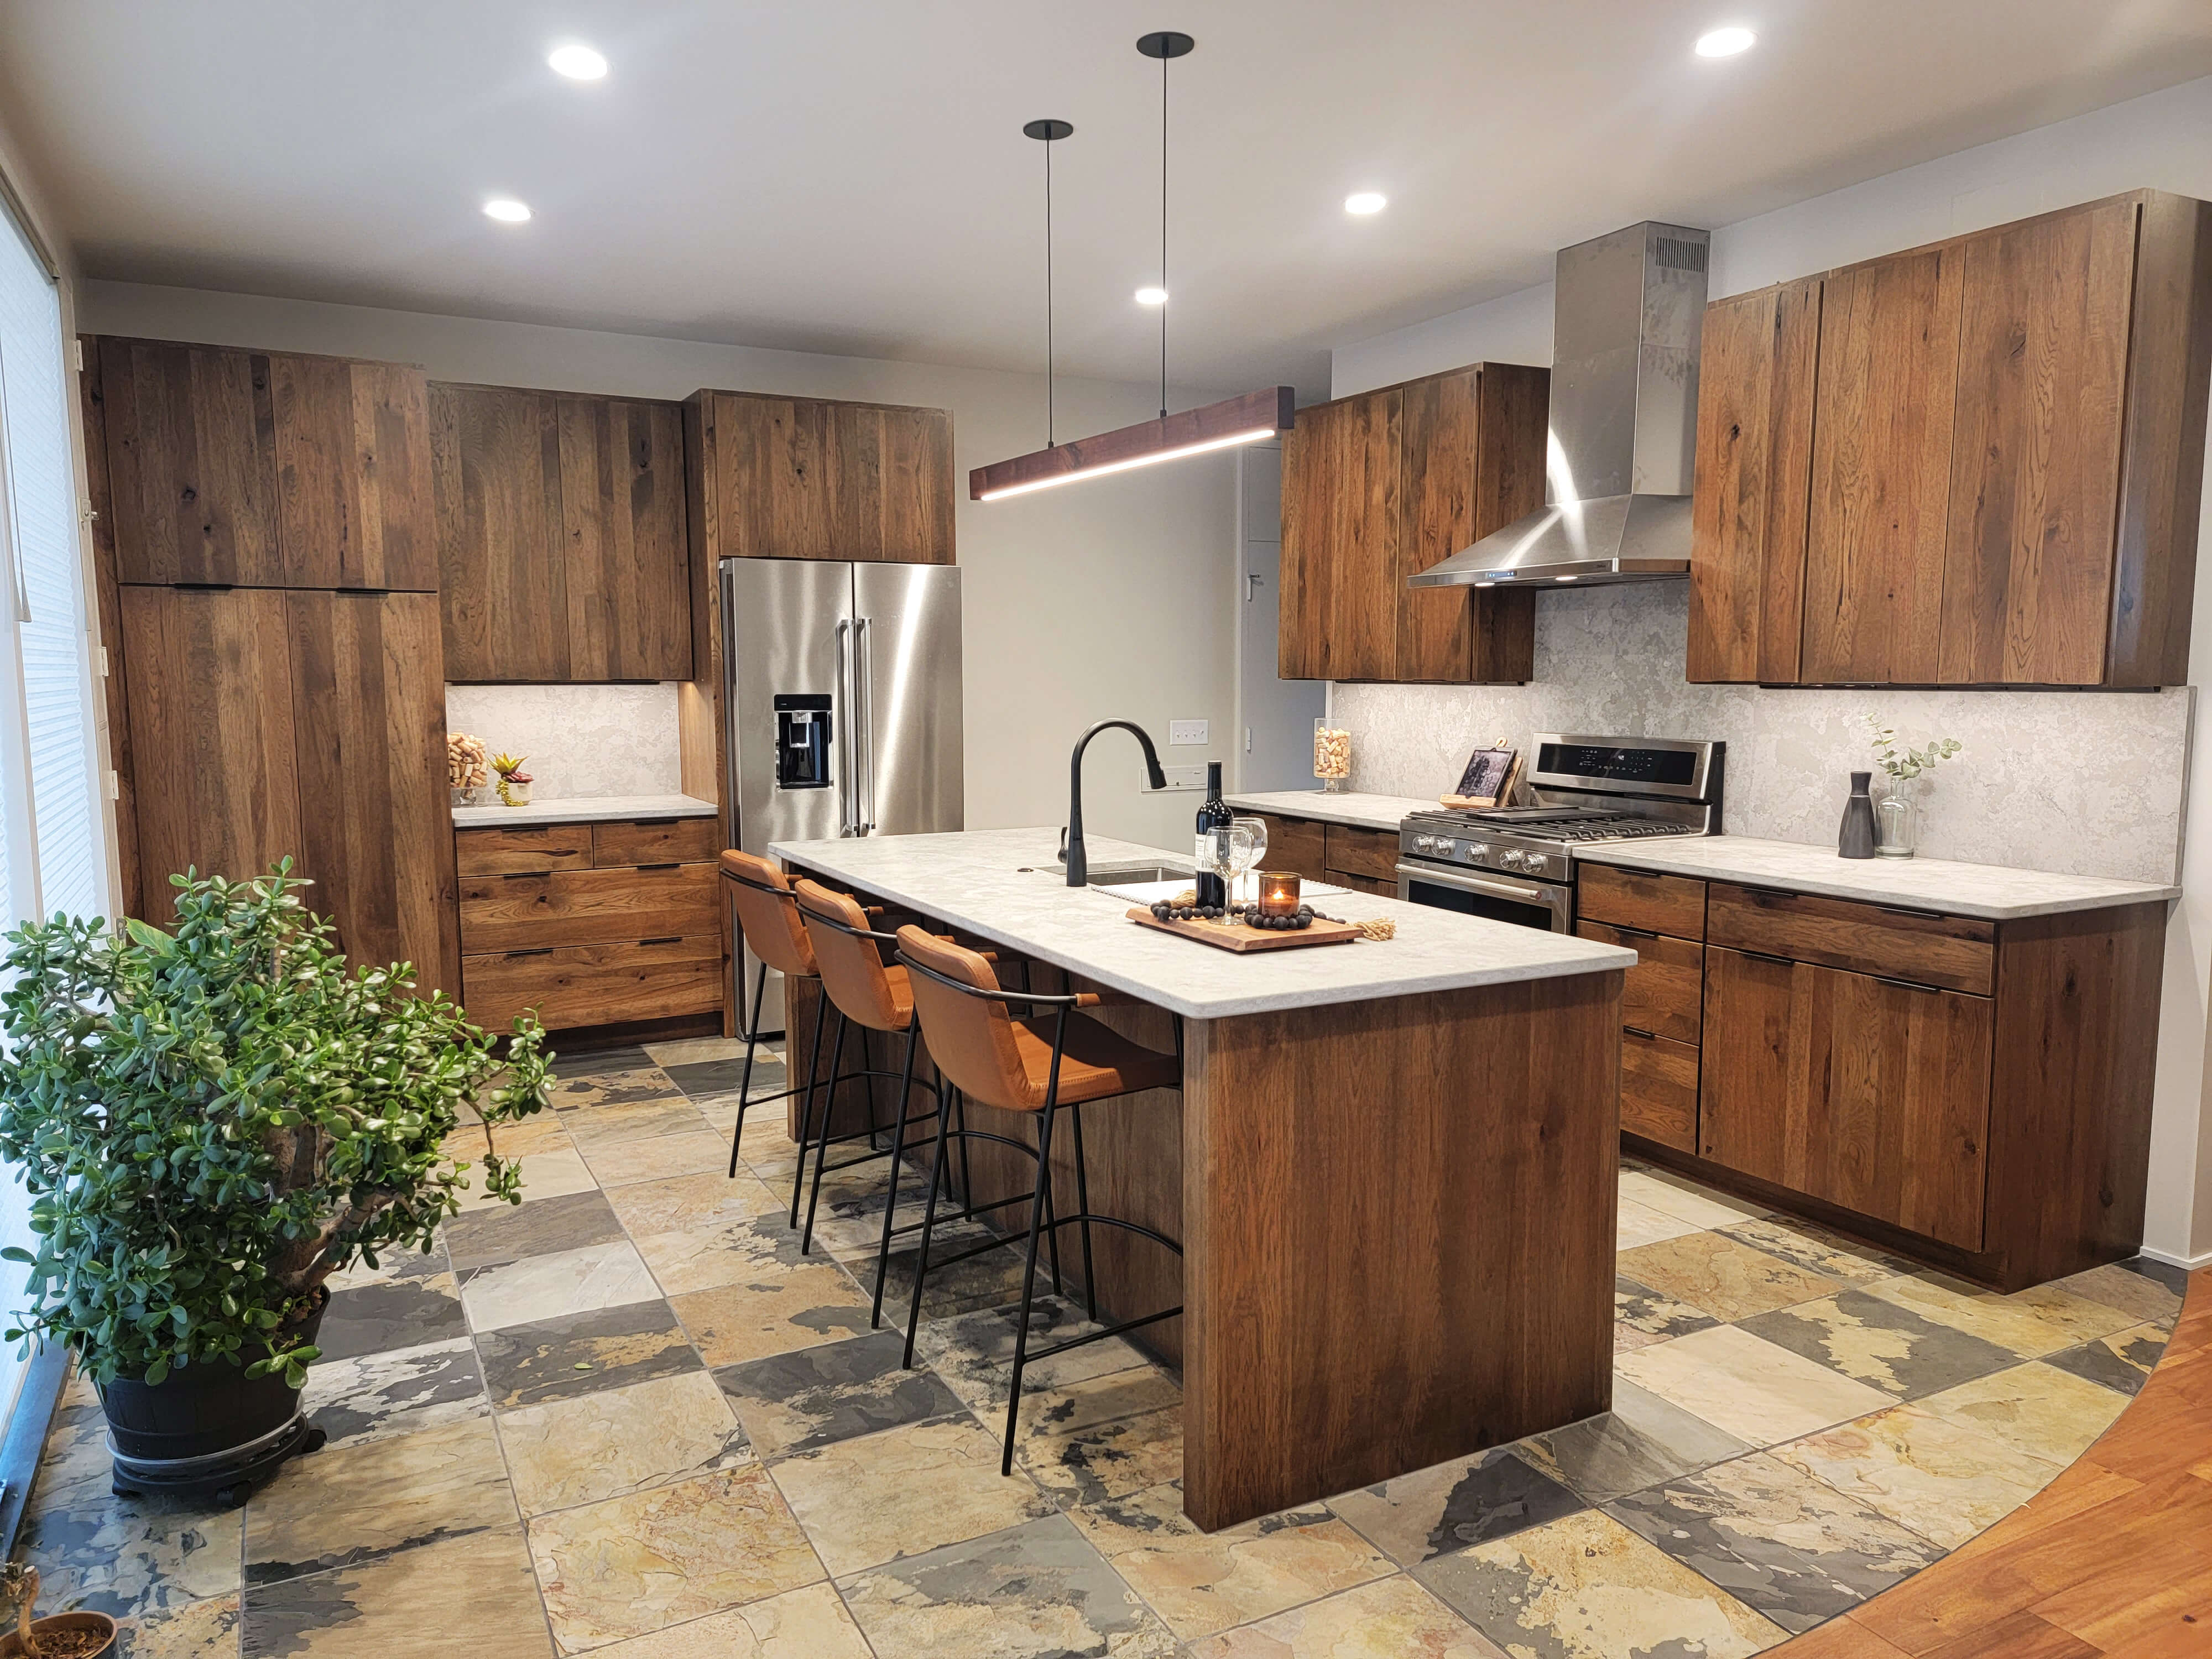 A modern rustic styled kitchen design with Rustic Hickory slab cabinet doors with a medium to dark stained finish.